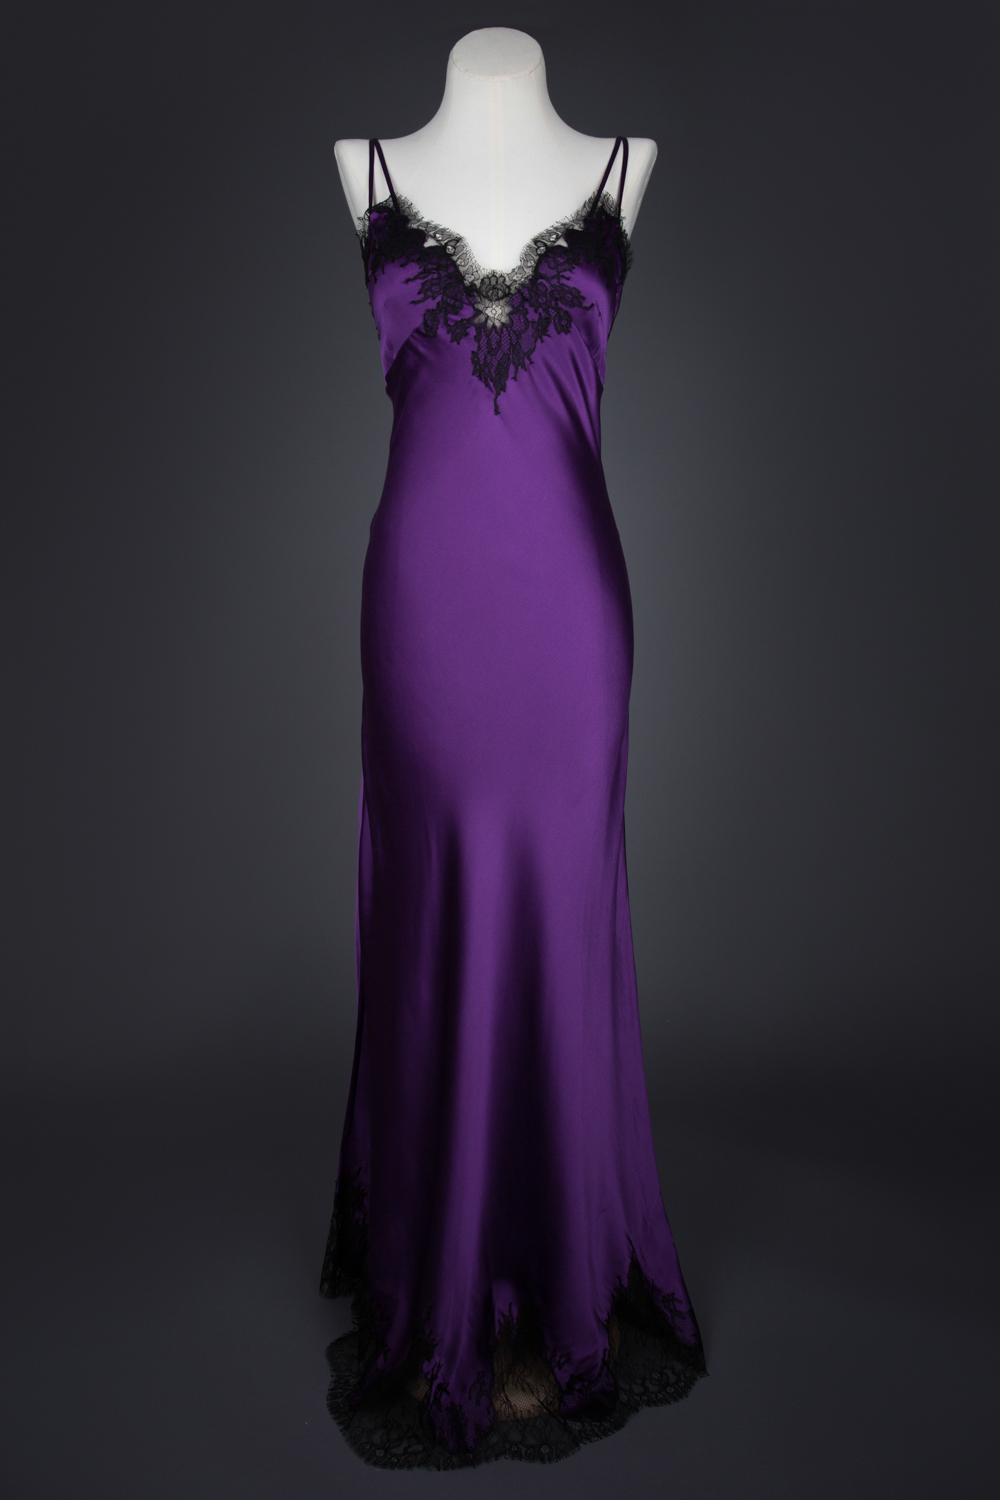 'Amilee' Silk Gown With Lace Appliqué by Layneau, c. 2014, USA. The Underpinnings Museum. Photography by Tigz Rice.